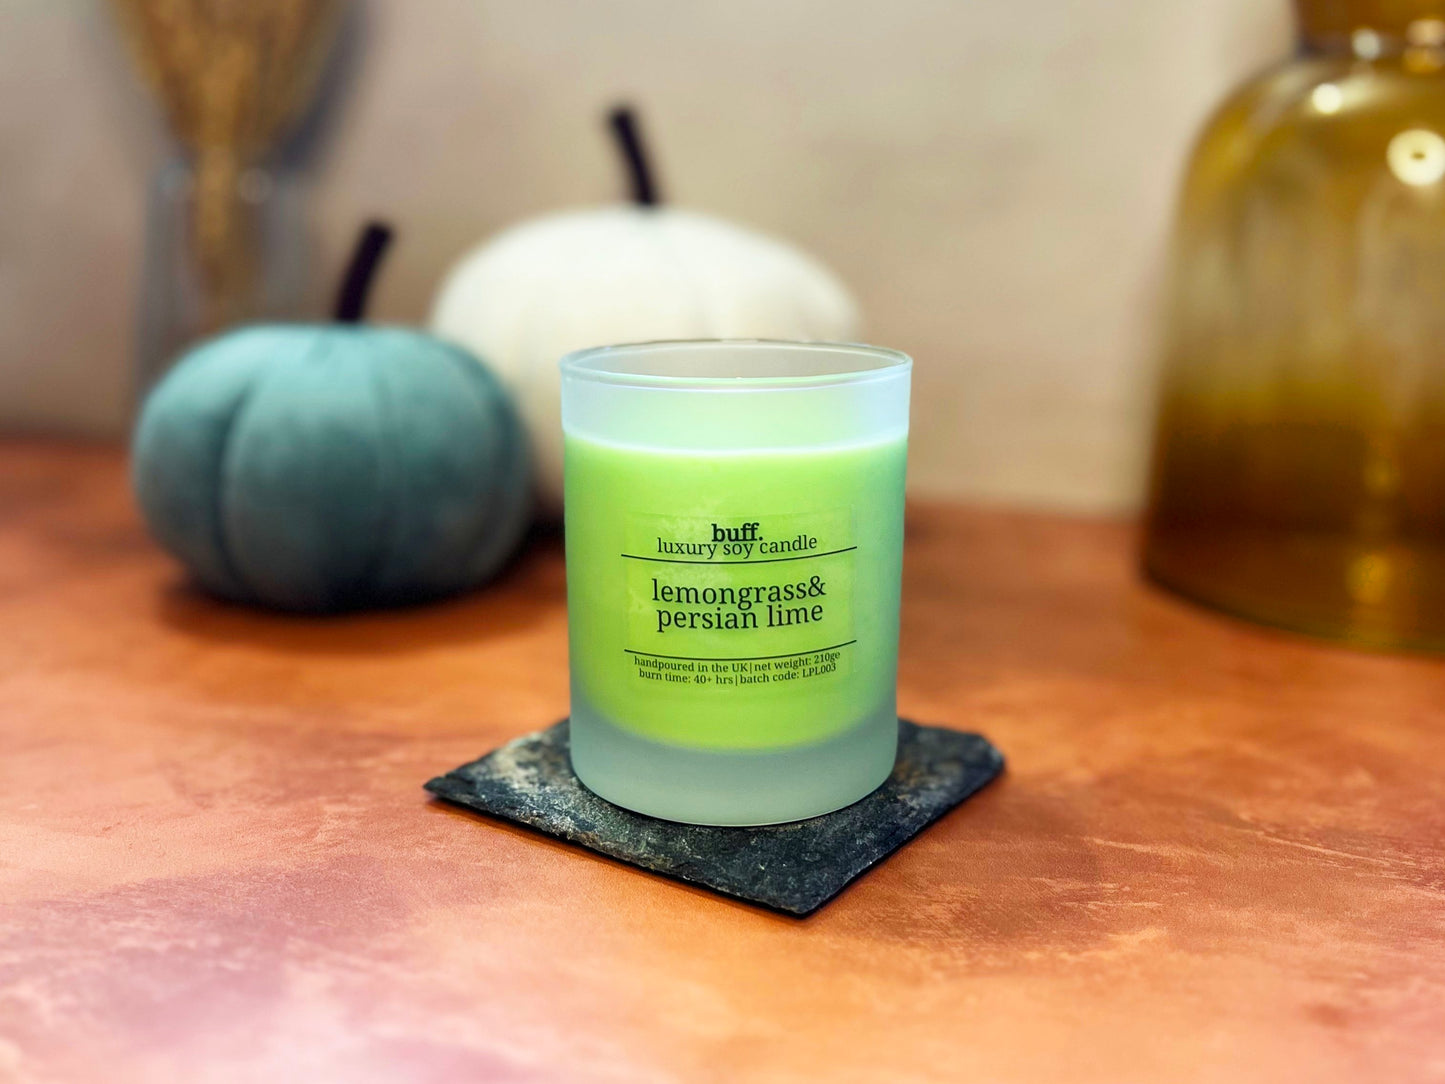 Green lemongrass and Persian lime soy wax candle in frosted glass